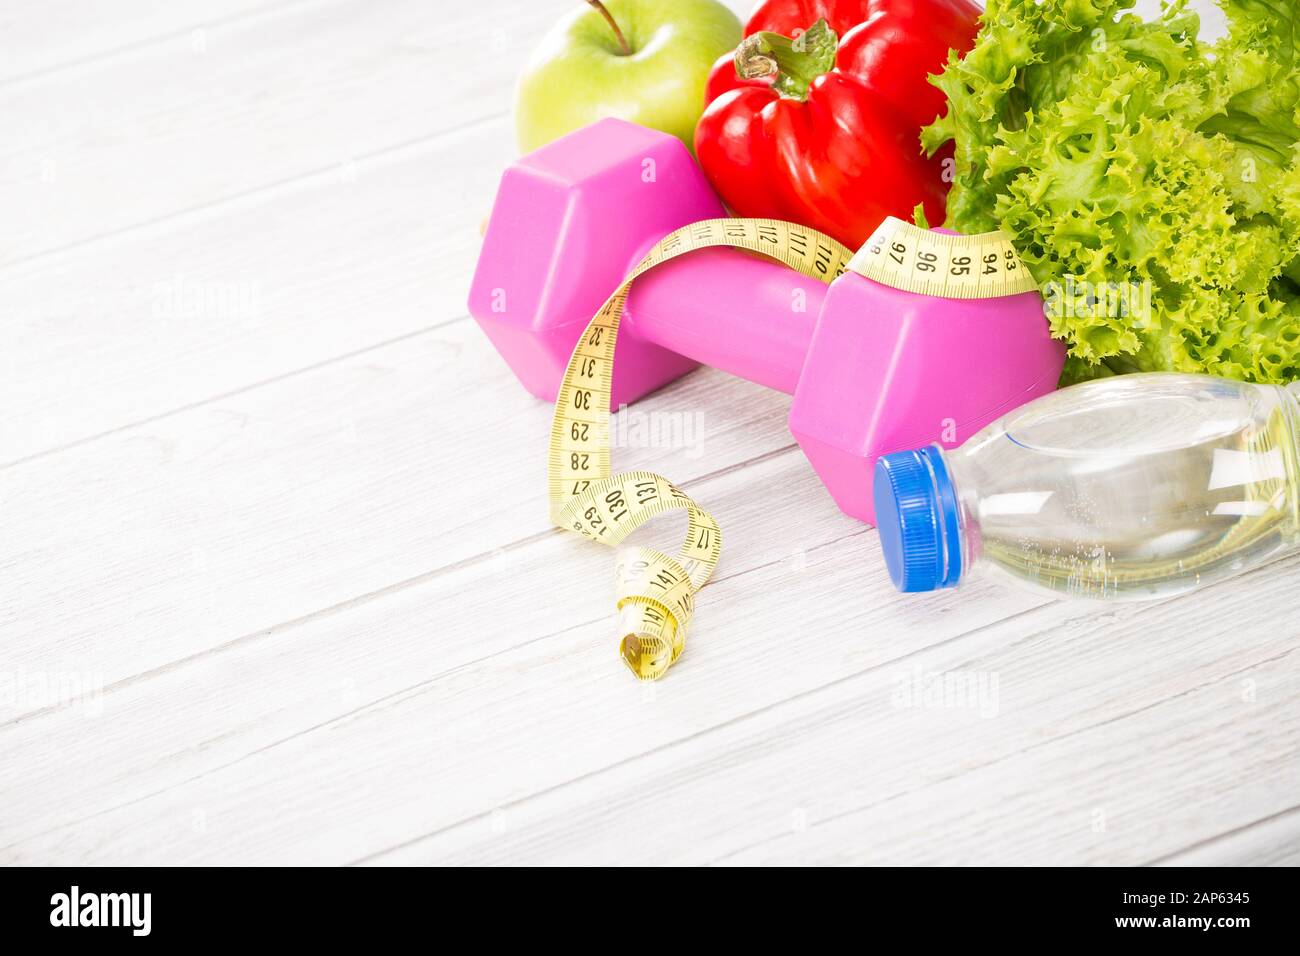 Fitness concept with dumbbells and healthy food. Stock Photo